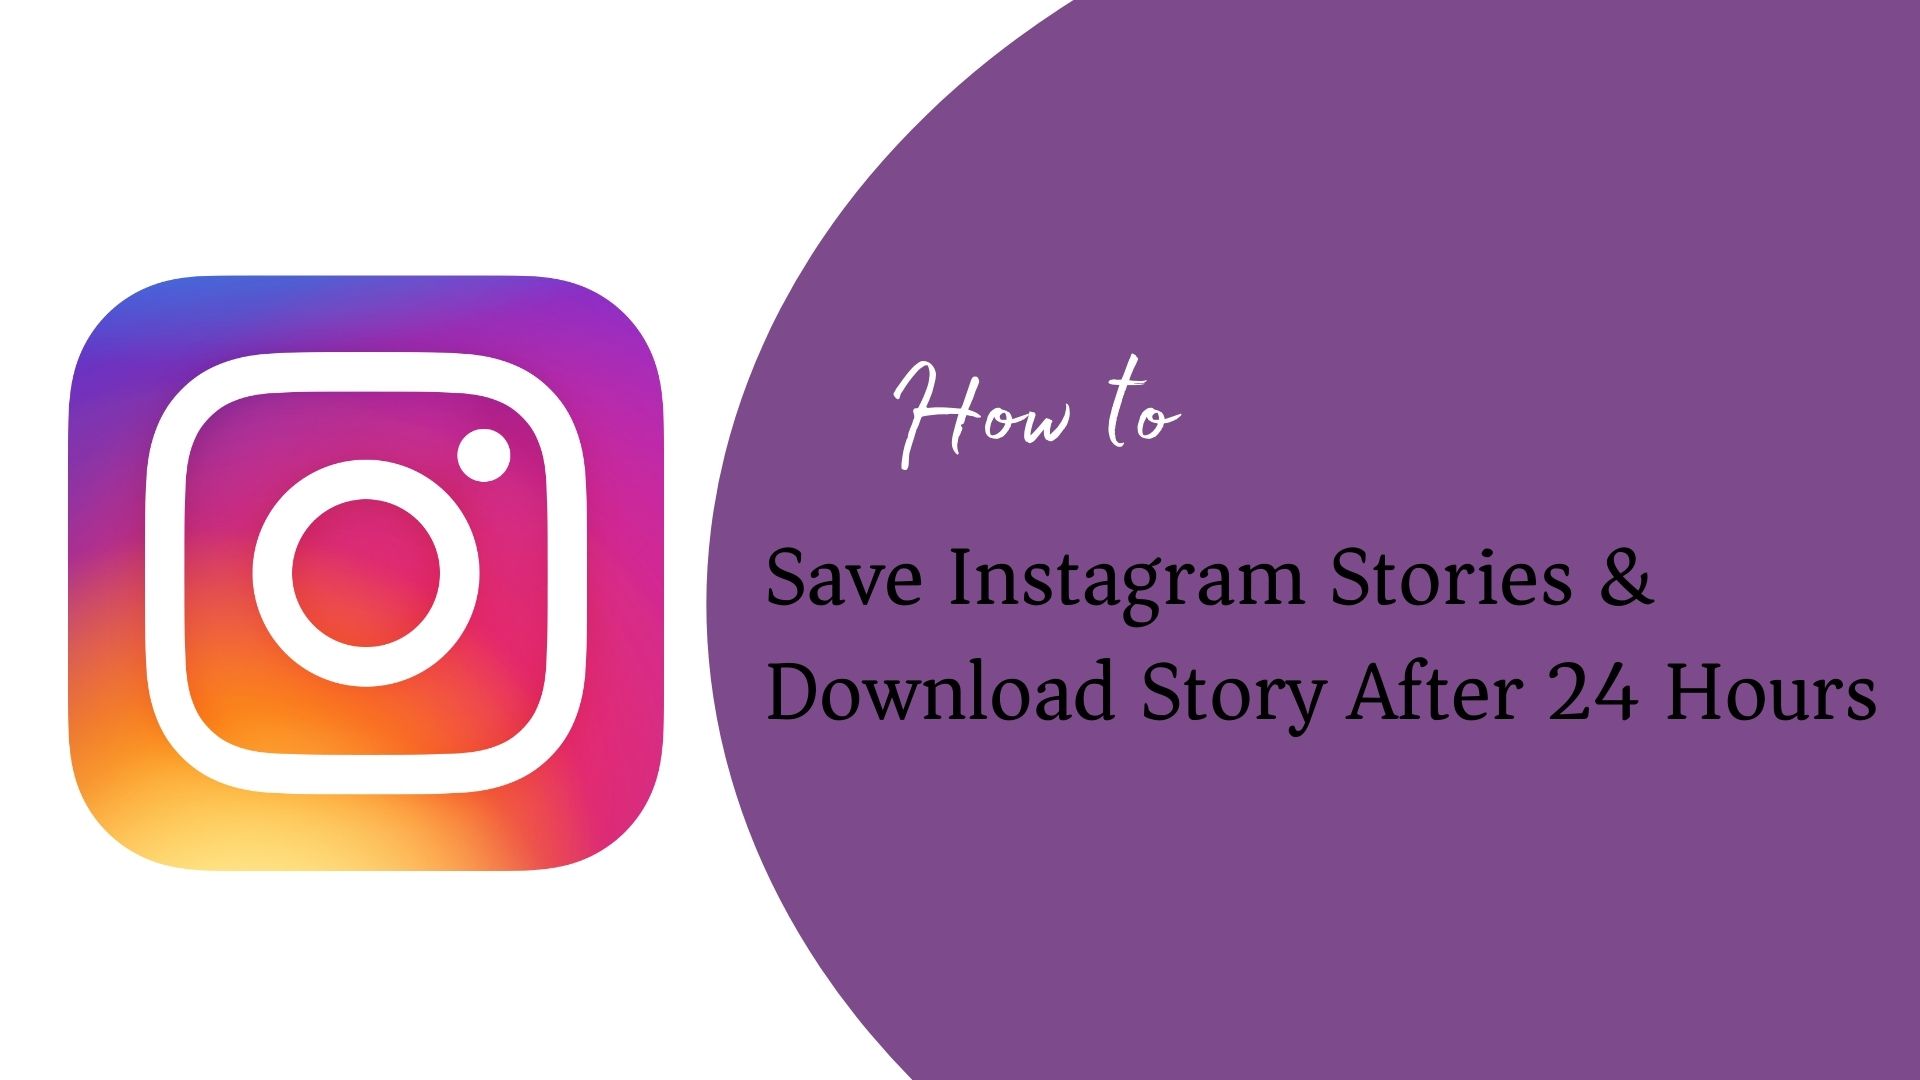 How to Save Instagram Stories & Download Story After 24 Hours